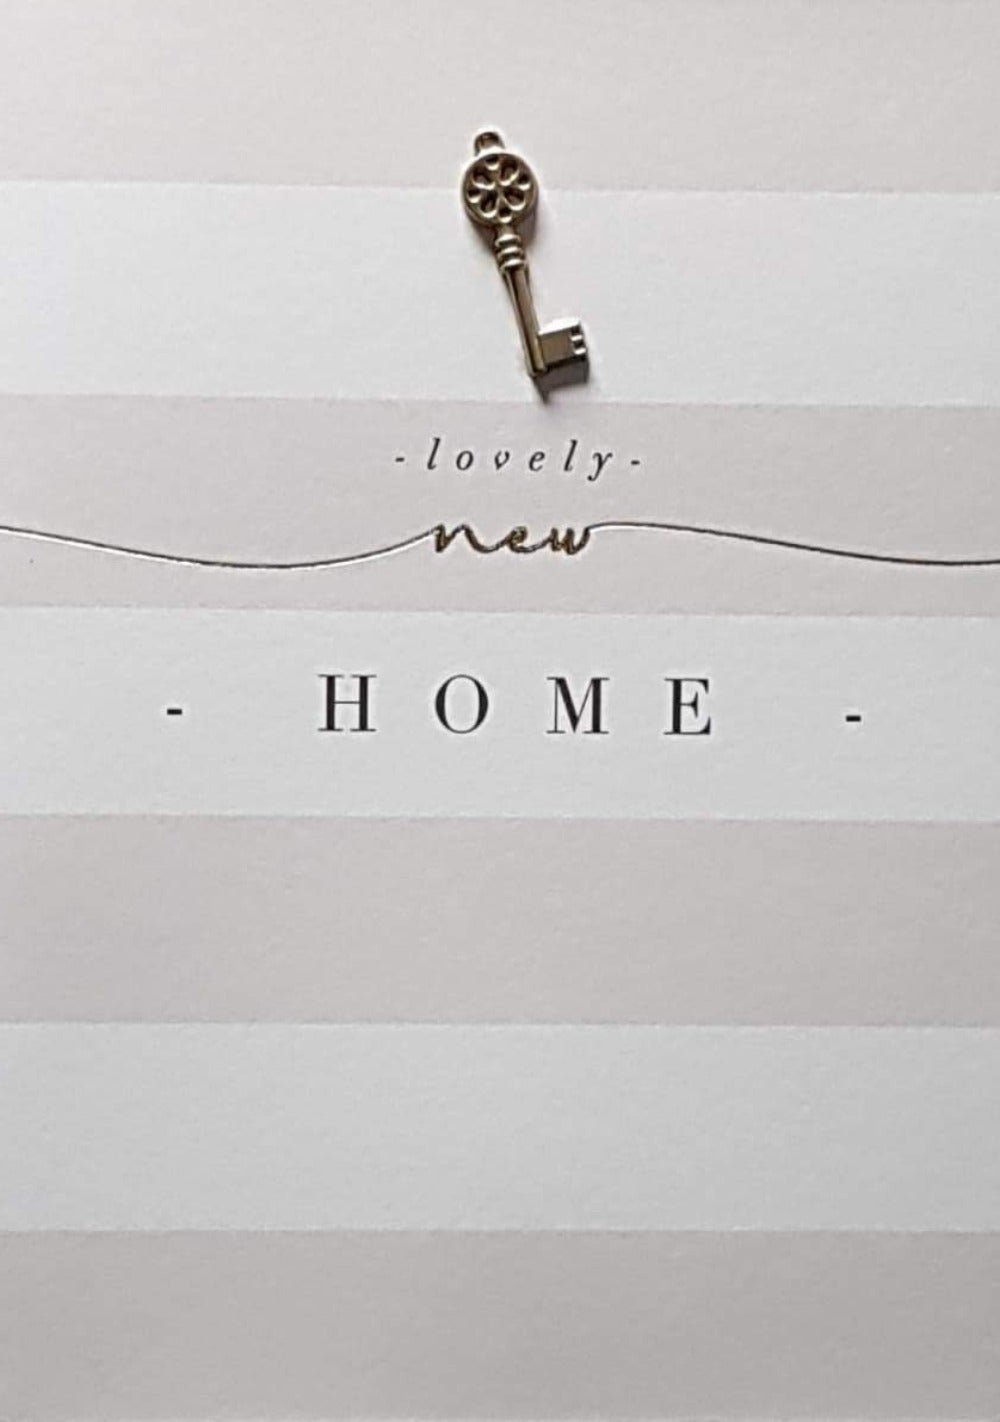 Congratulations Card - New Home / 'Lovely Home' & A Gold Key